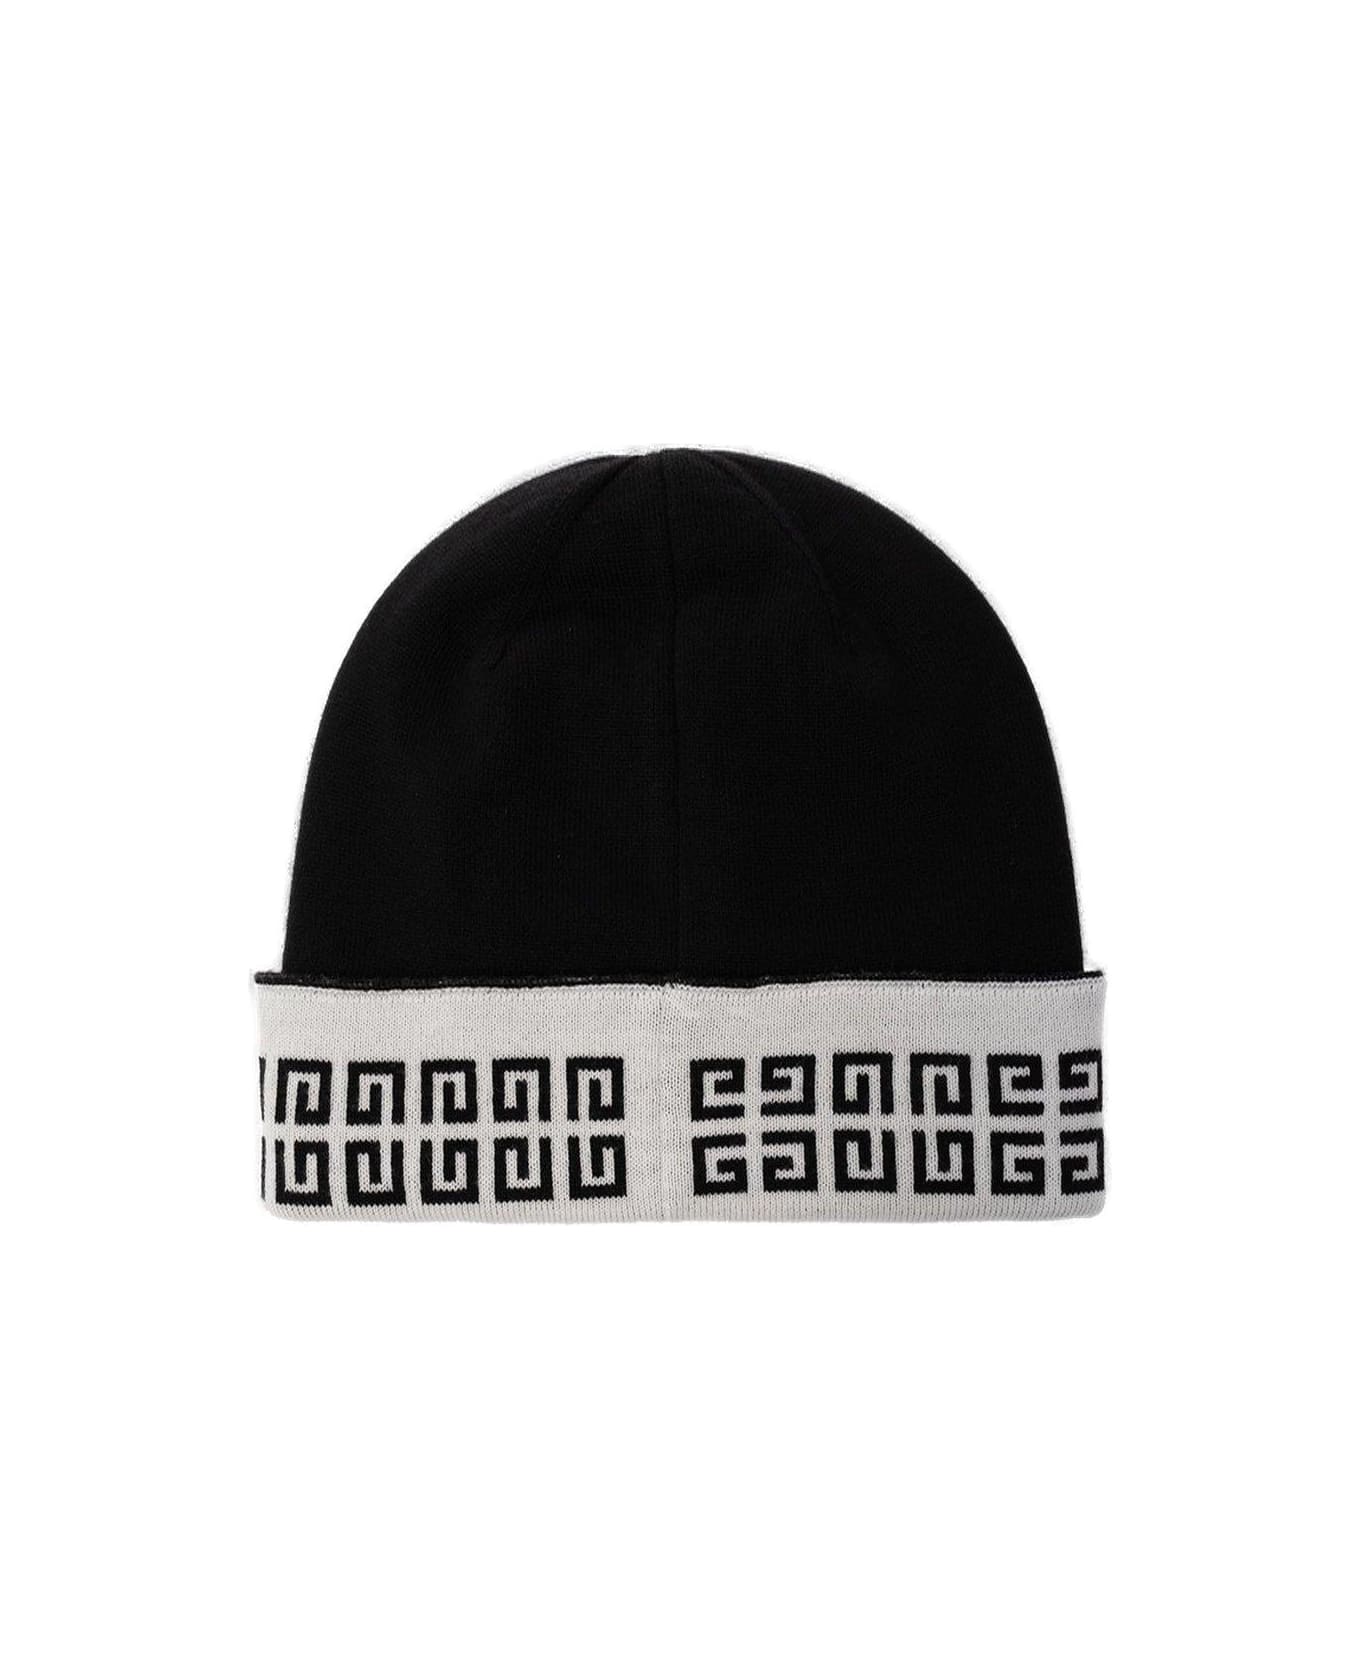 Givenchy 4g Monogrammed Knit Beanie